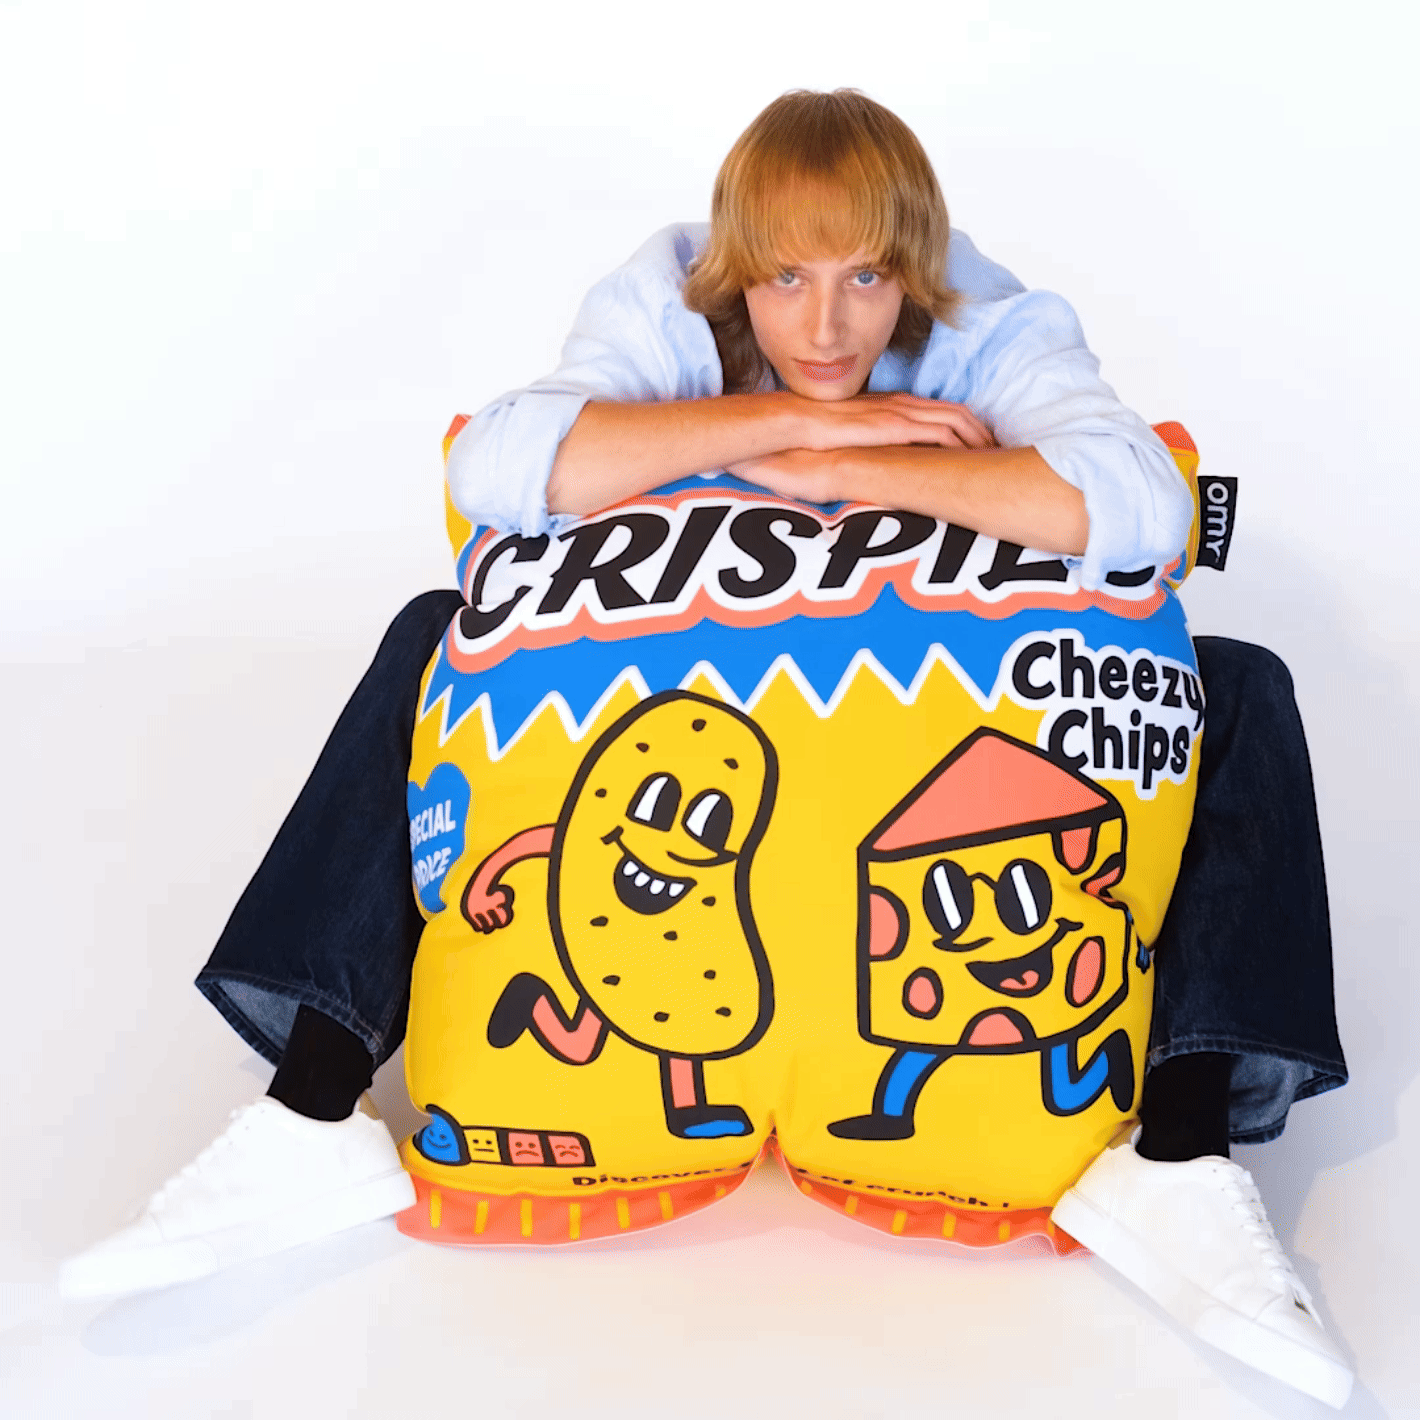 Crispies - Giant inflatable pillow